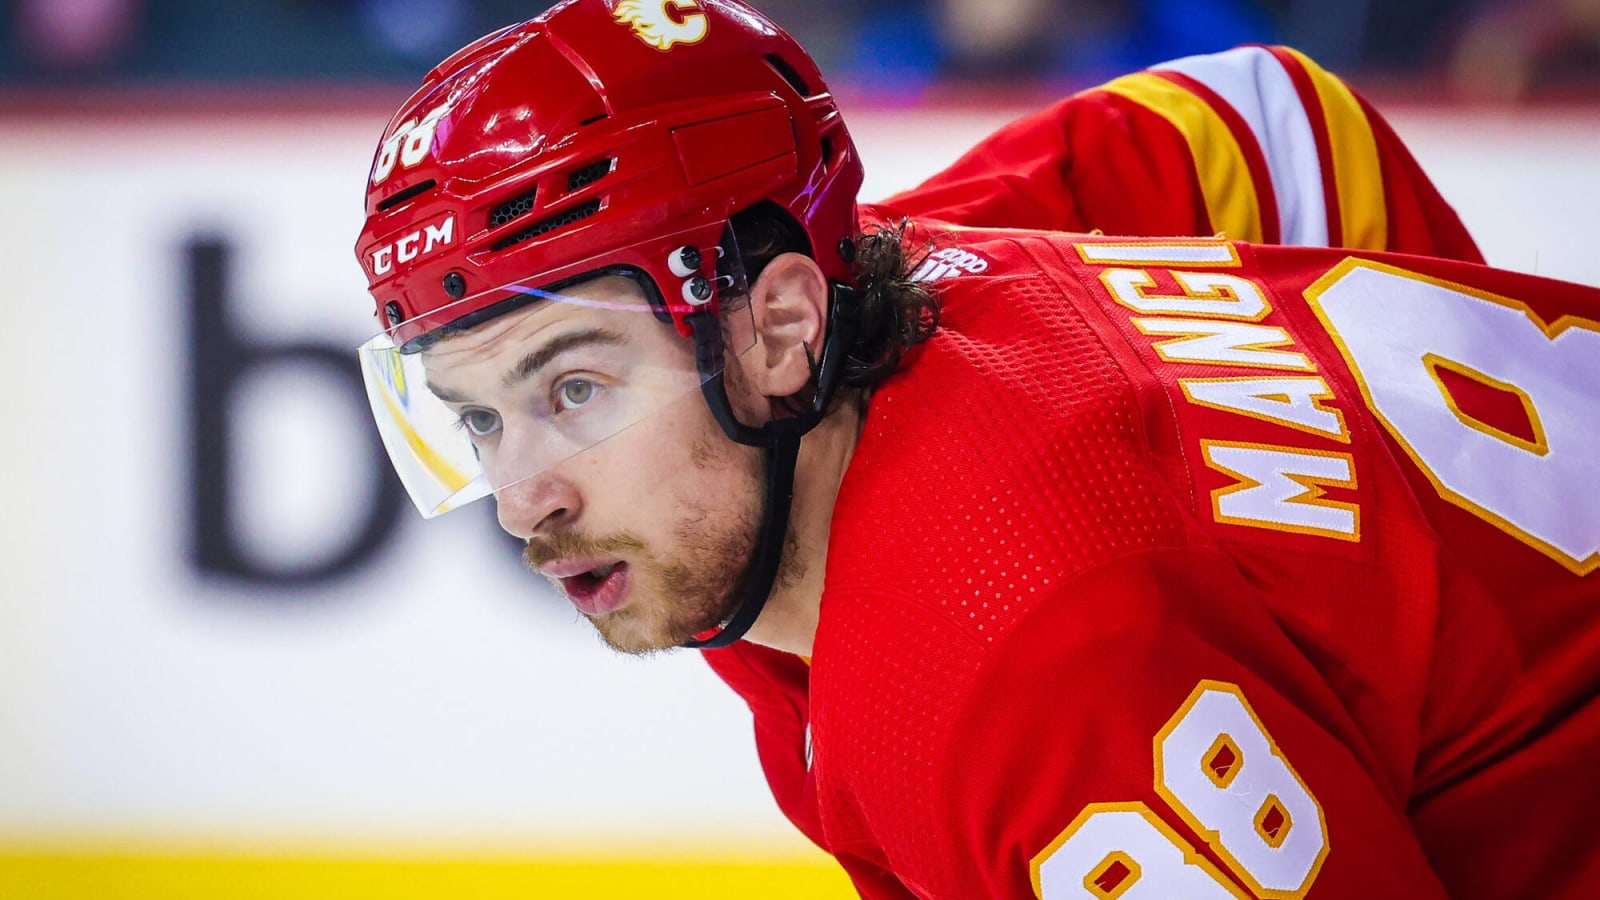 Flames forward Andrew Mangiapane scores 30th goal of season against New Jersey